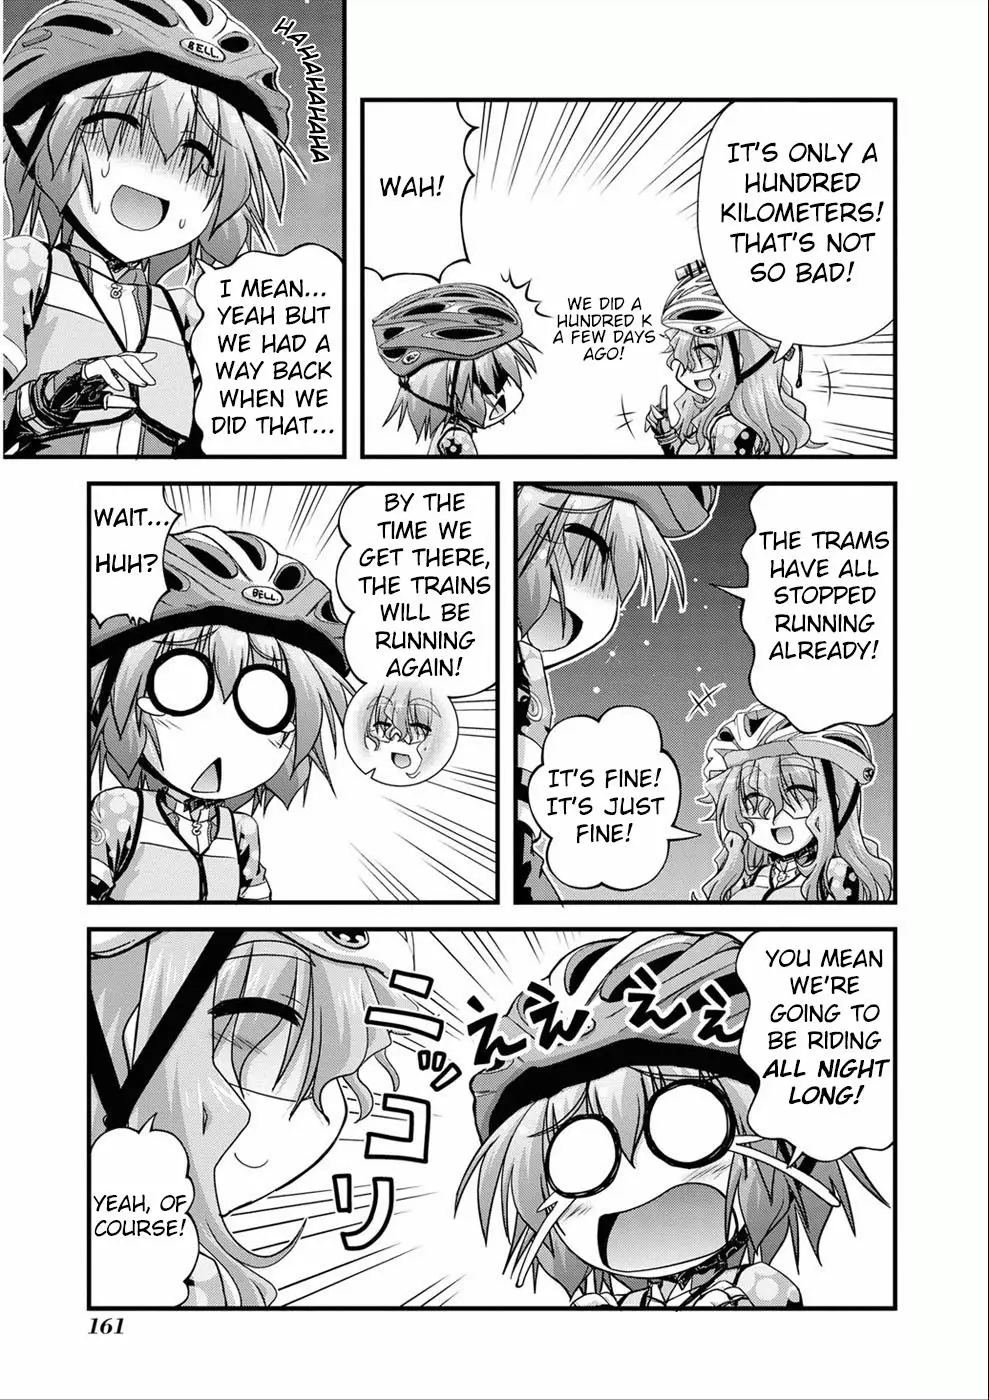 Long Riders! - 13 page 24-6023fa0c